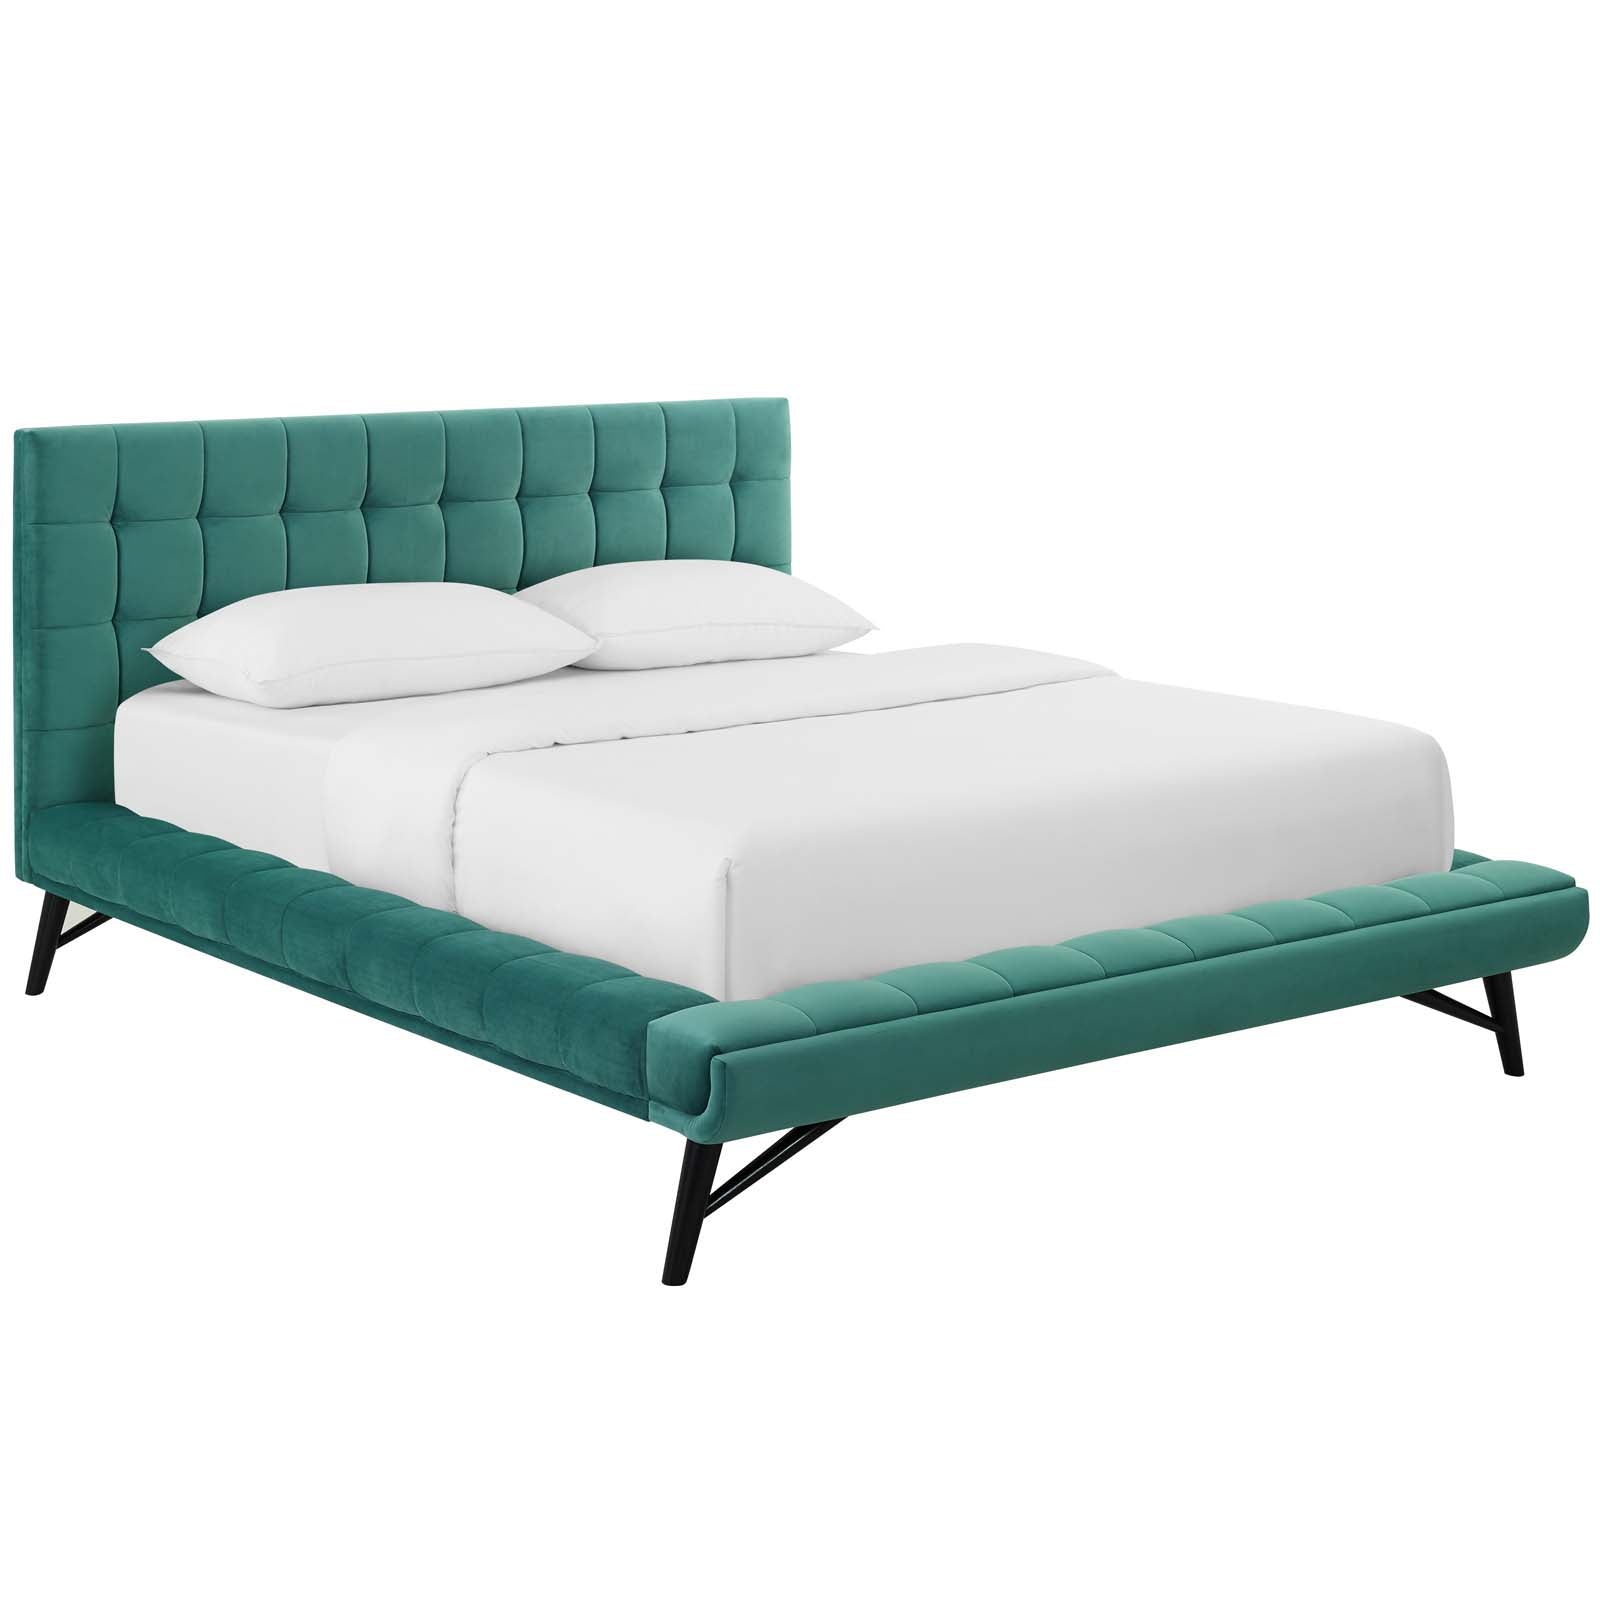 Modway Beds - Julia Biscuit Tufted Queen Bed Teal